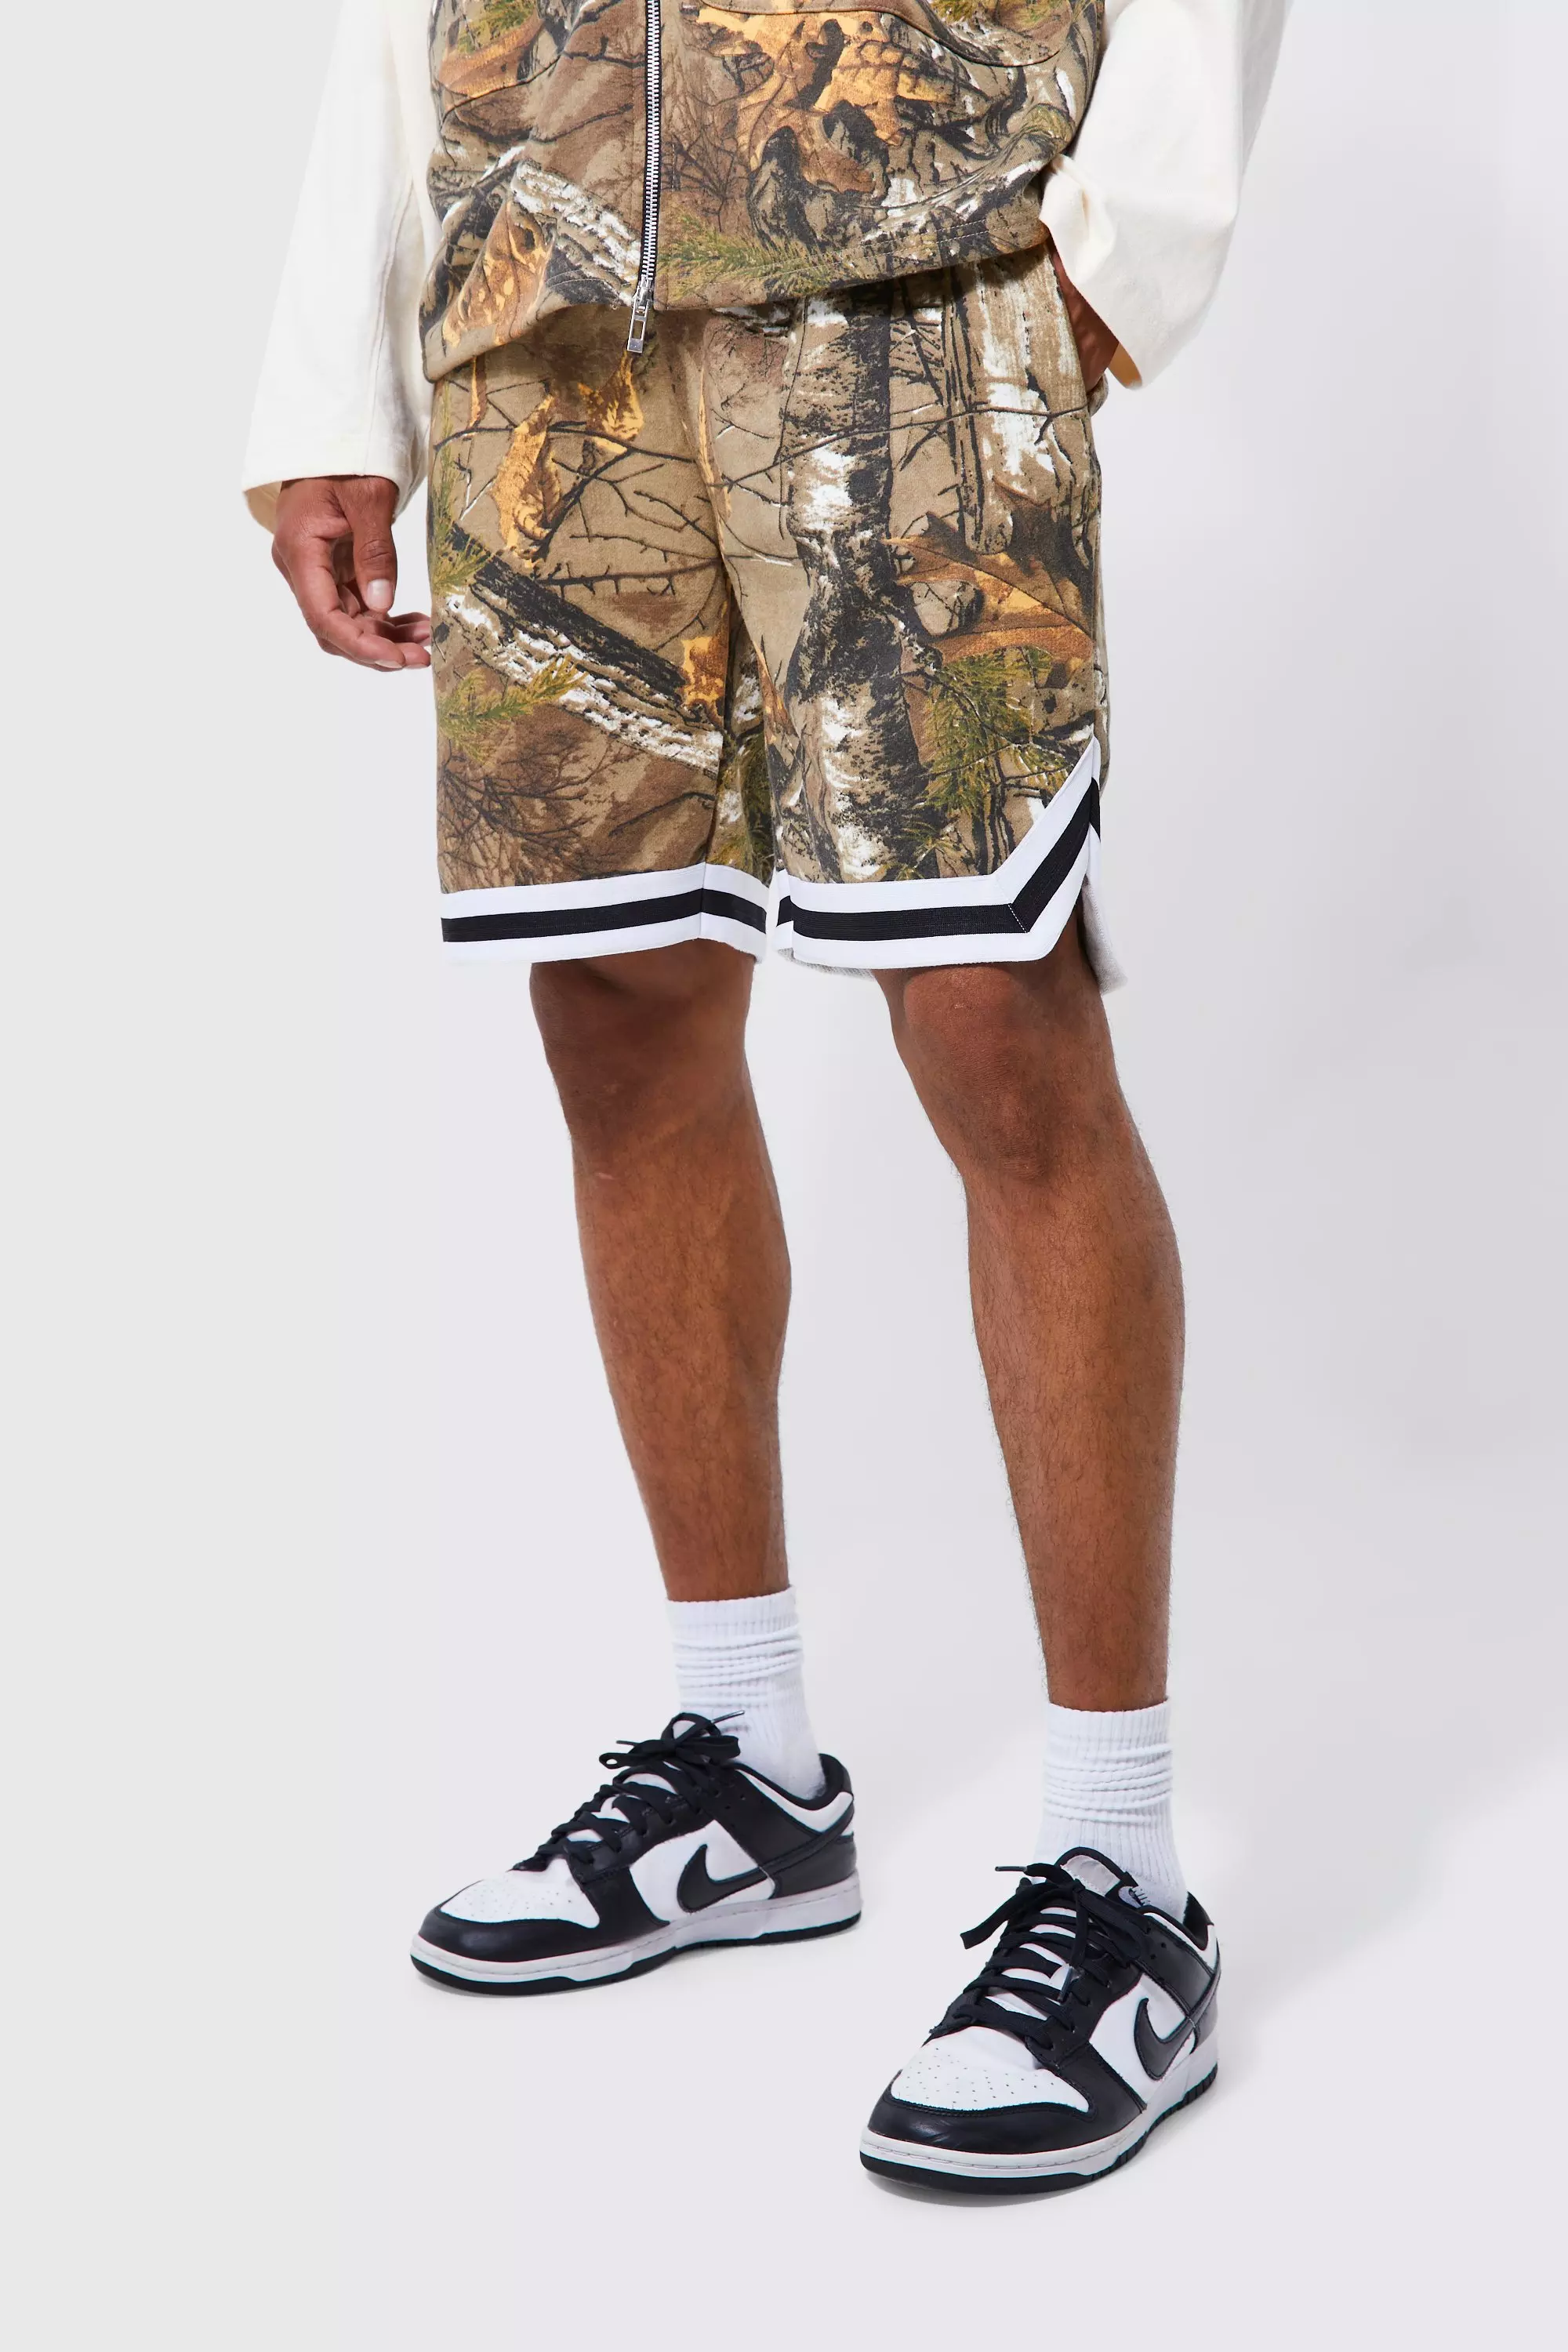 Loose Fit Mid Length Camo Basketball Short